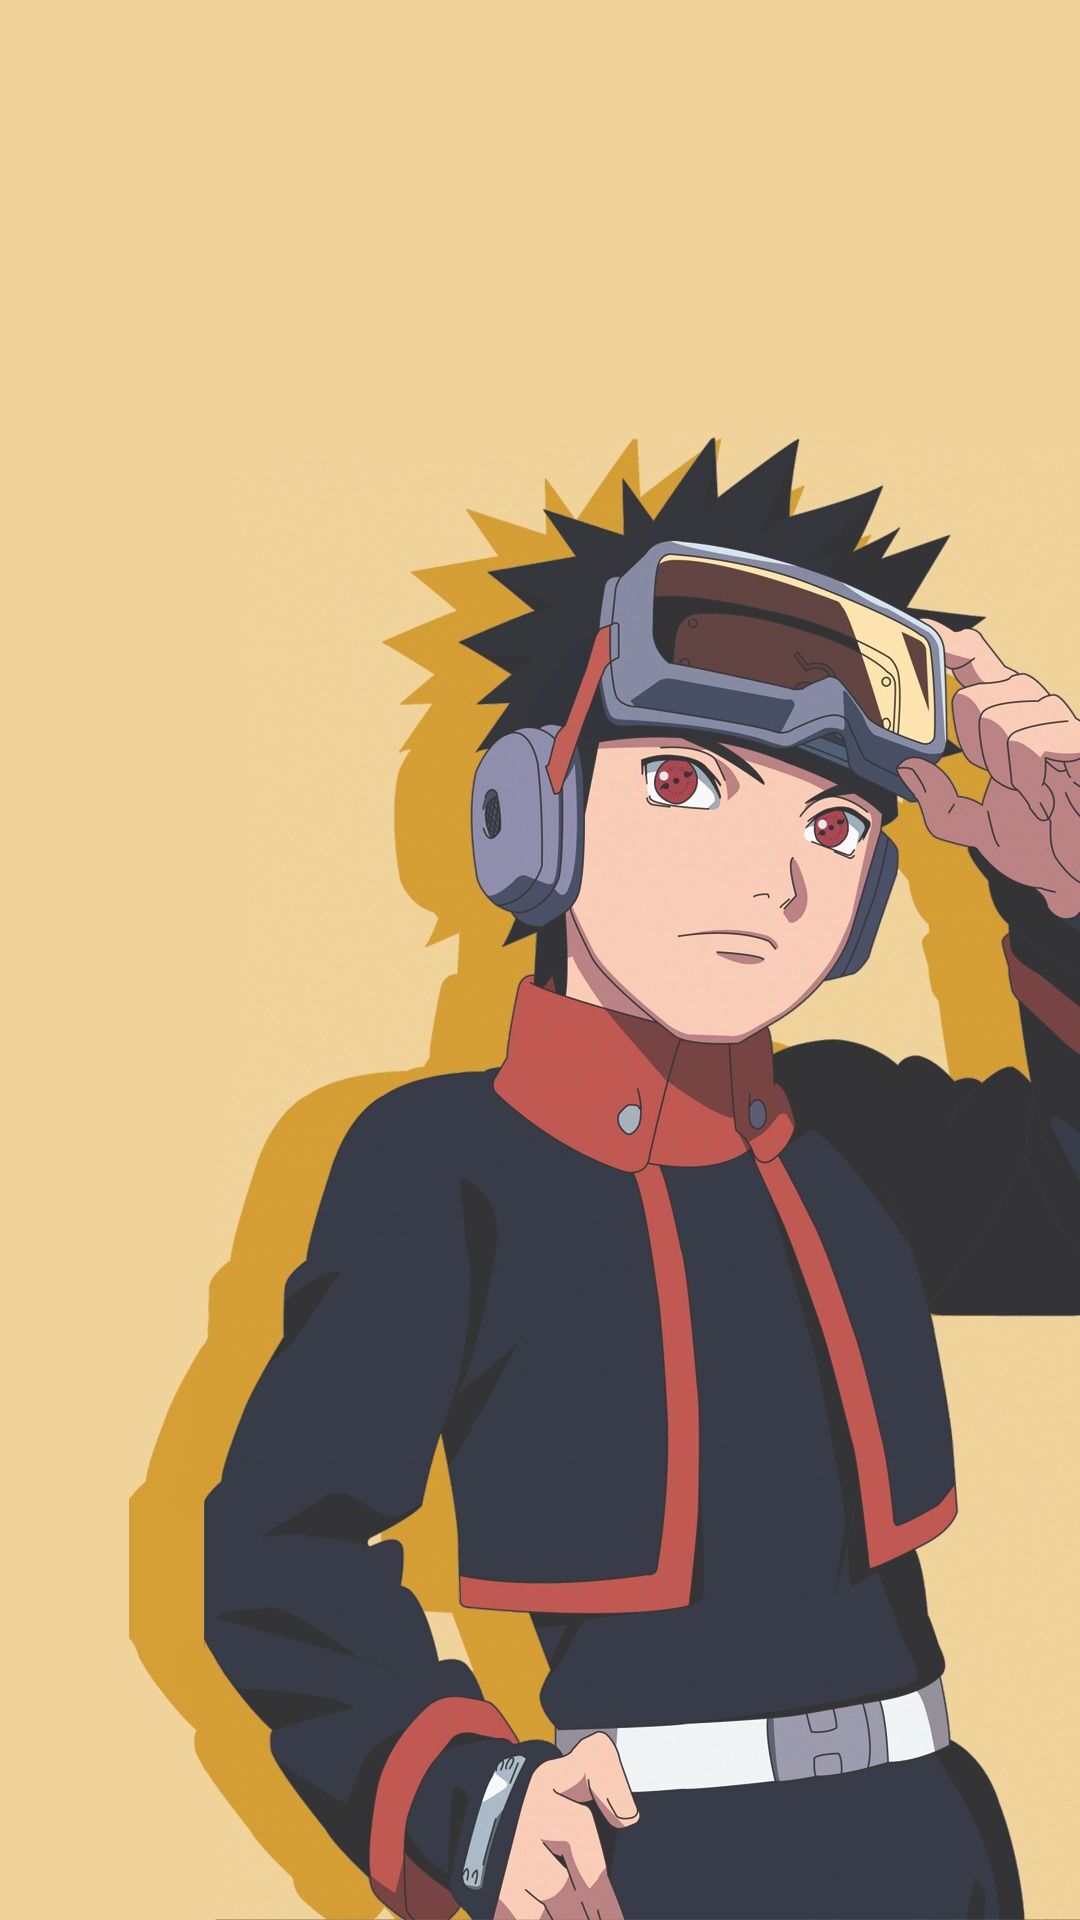 Obito Wallpaper Kolpaper Awesome Free Hd Wallpapers